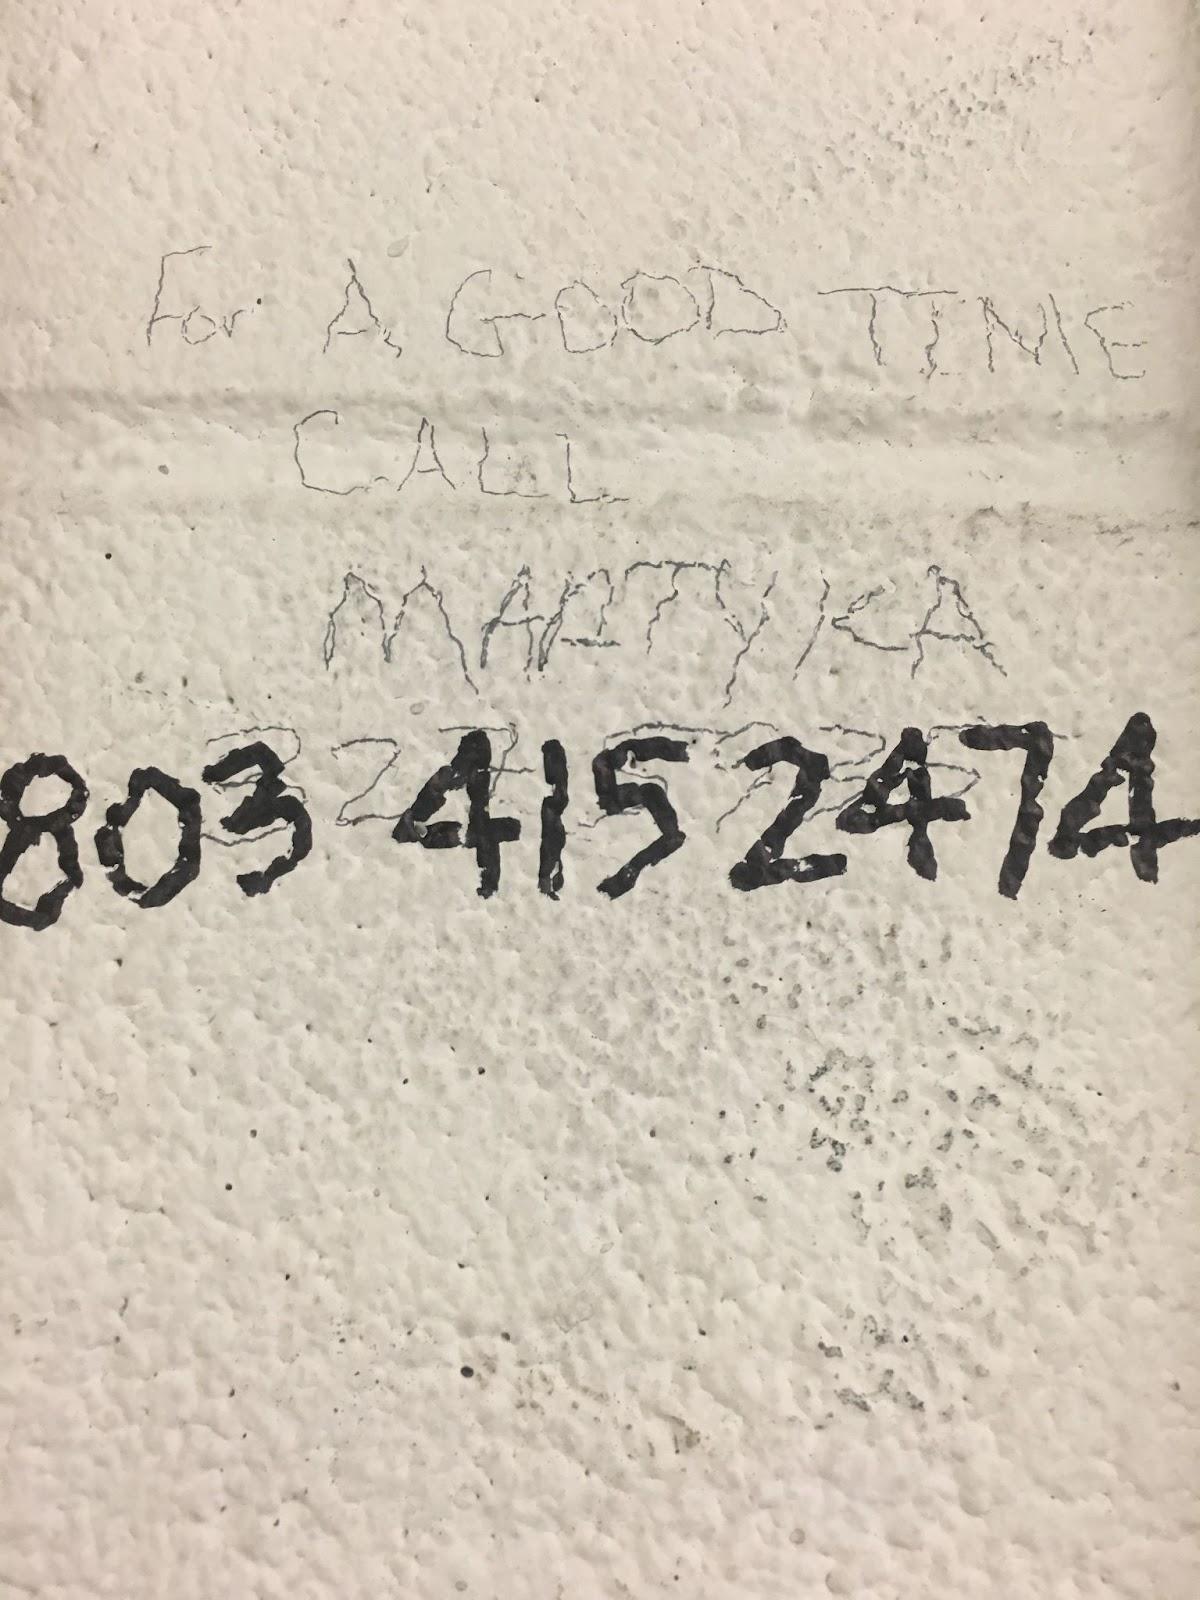 Martyka's phone number on the wall